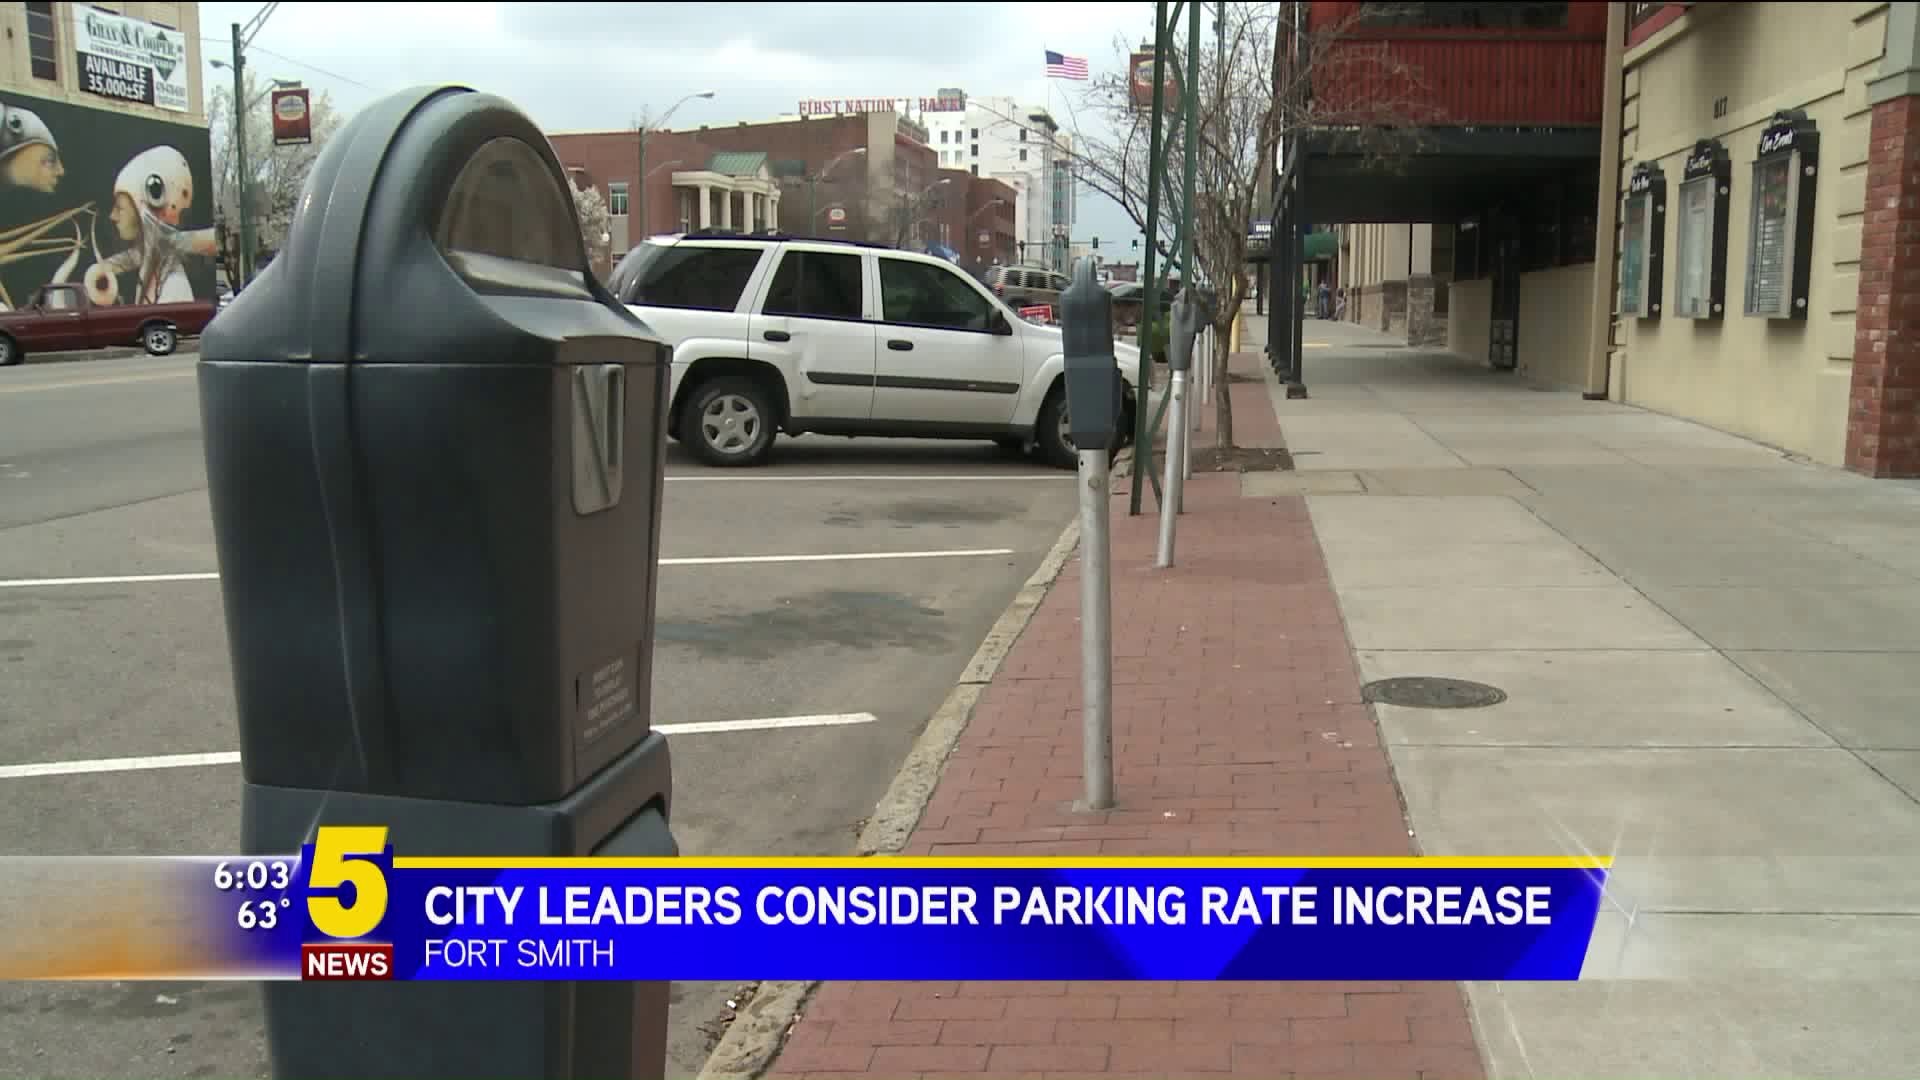 City Leaders Consider Parking Rate Increase